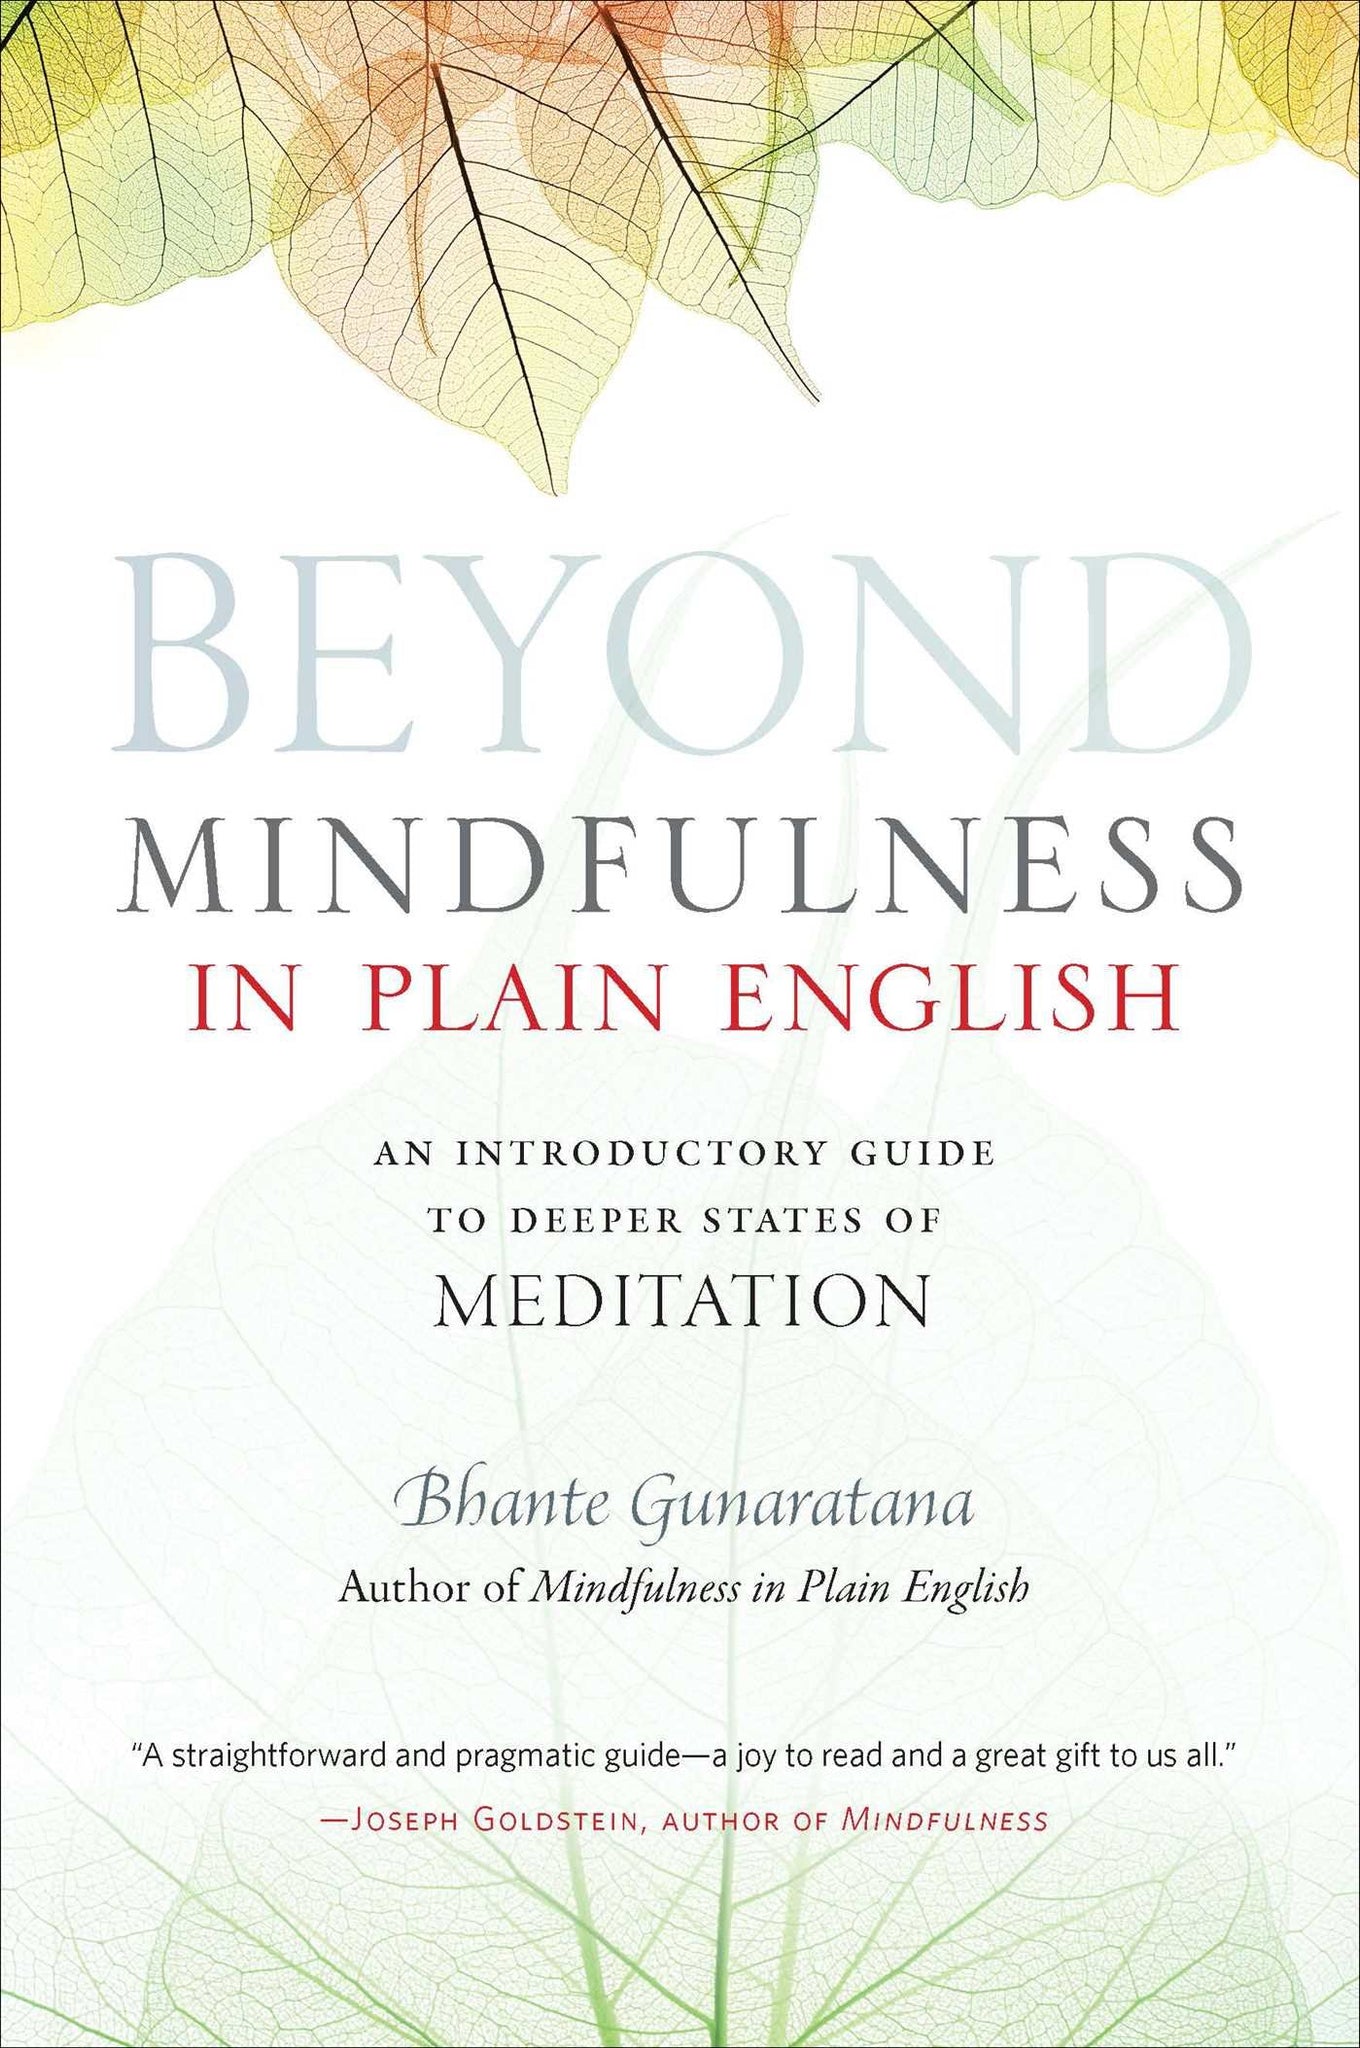 Beyond Mindfulness in Plain English : An Introductory Guide to Deeper States of Meditation by Bhante Henepola Gunaratana